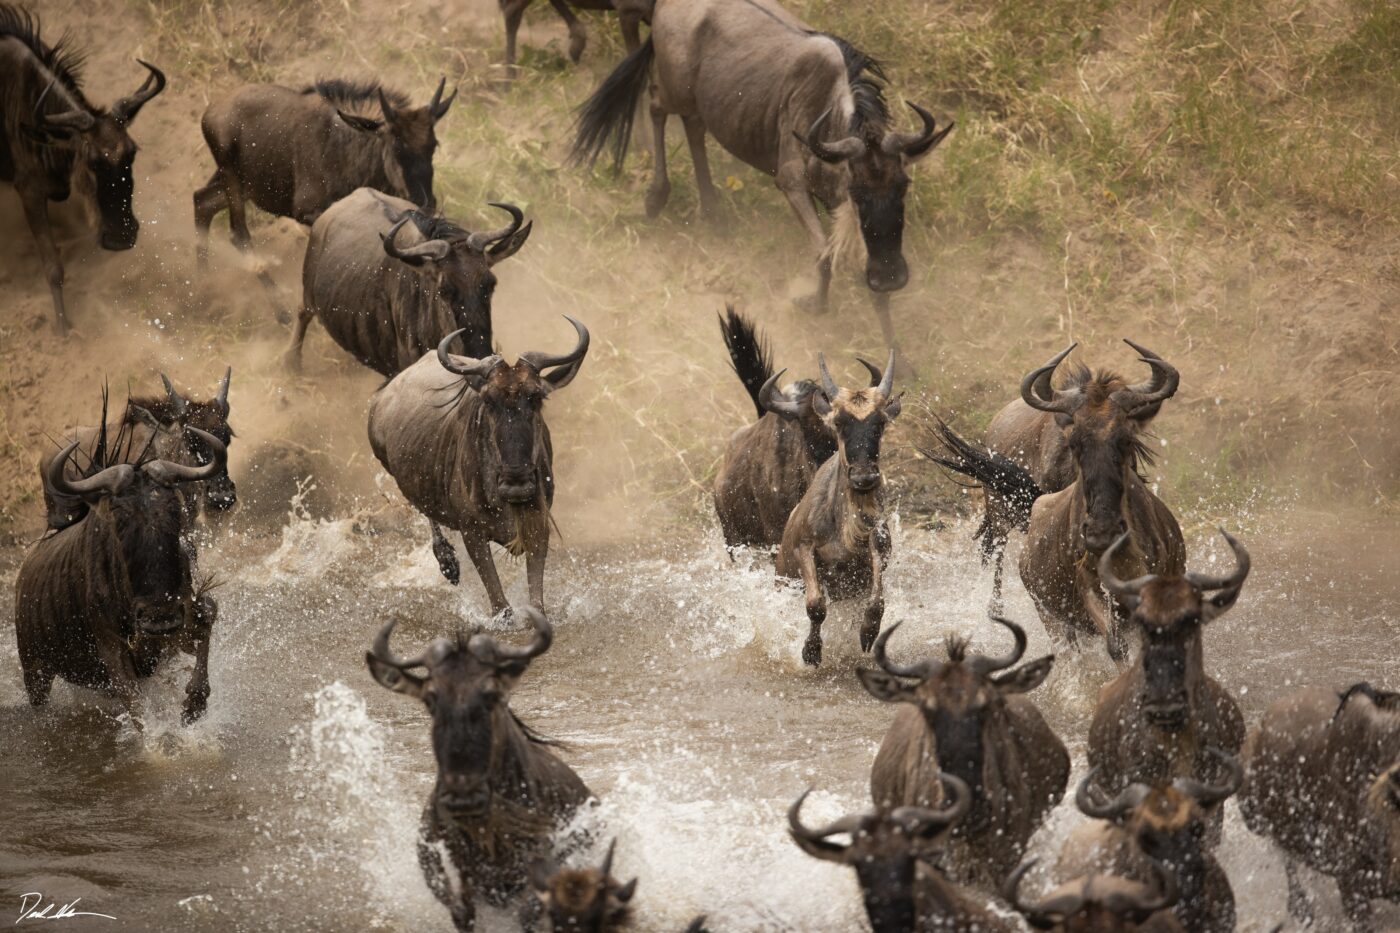 image of the great migration across the Mara River in Africa